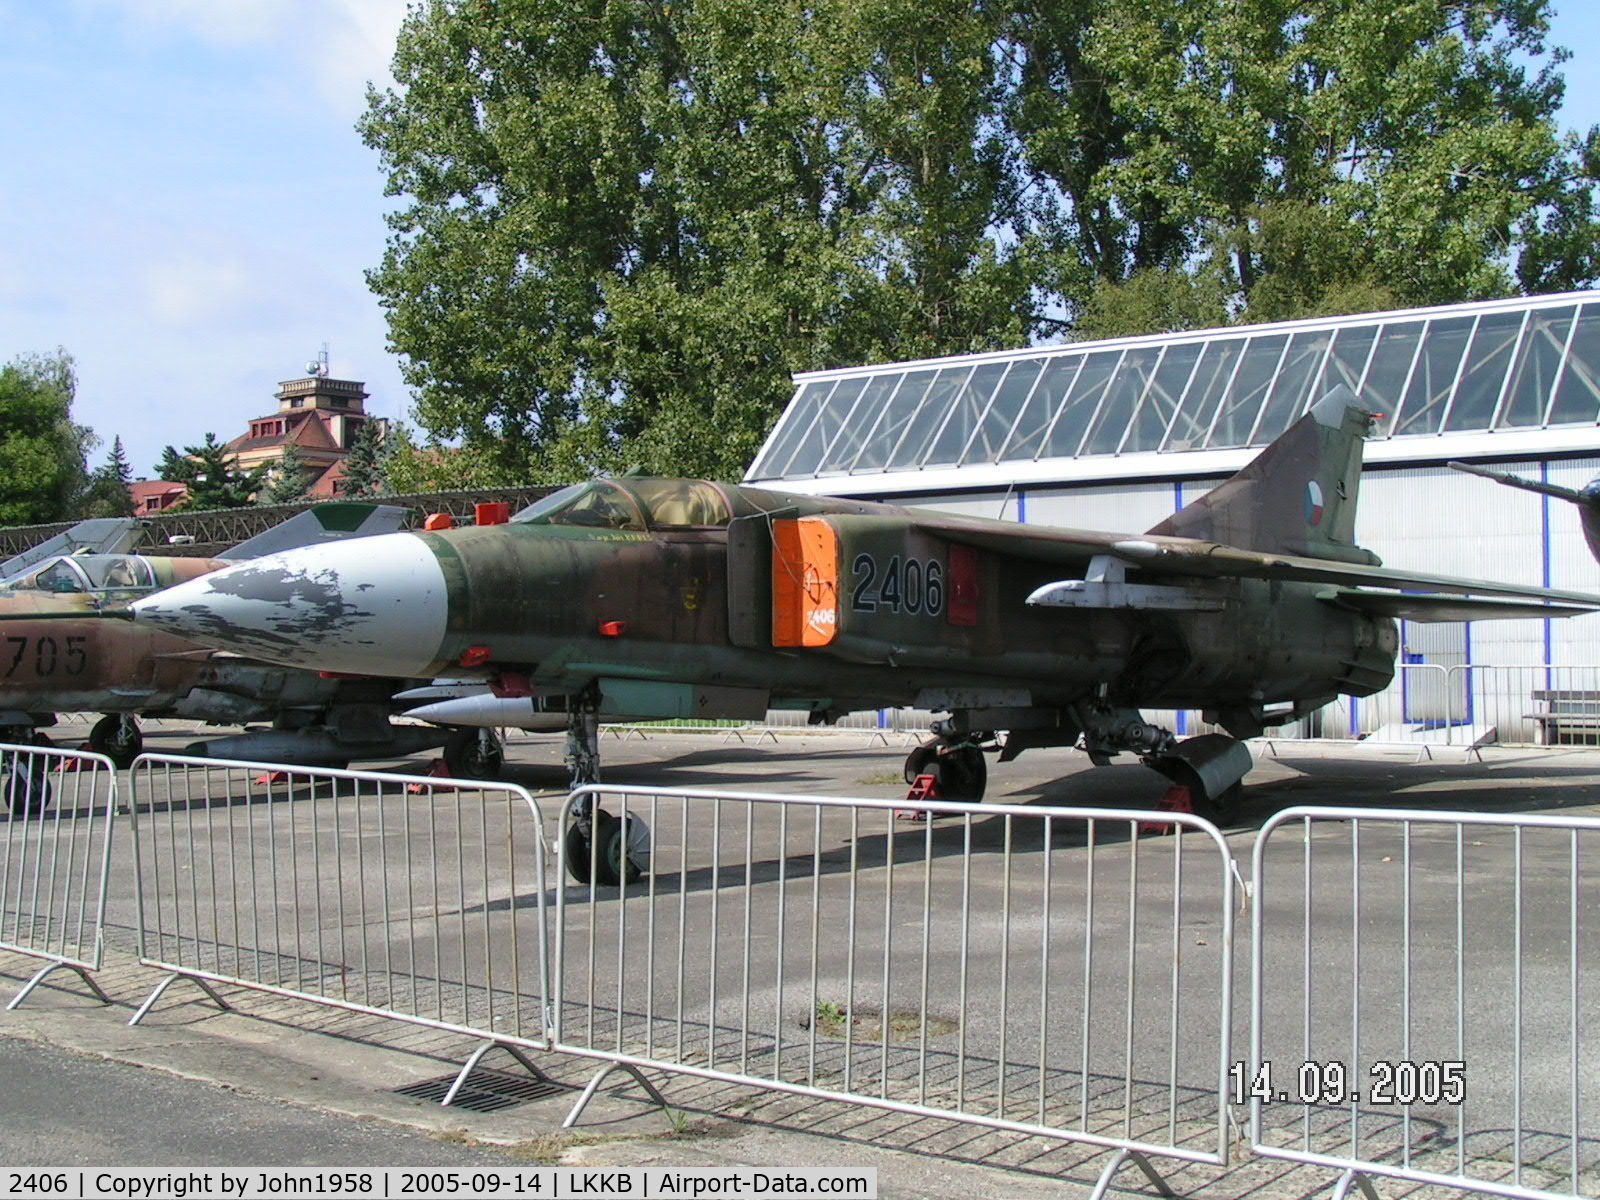 2406, Mikoyan-Gurevich MiG-23ML C/N 22406, At the air force museum just outside Prague